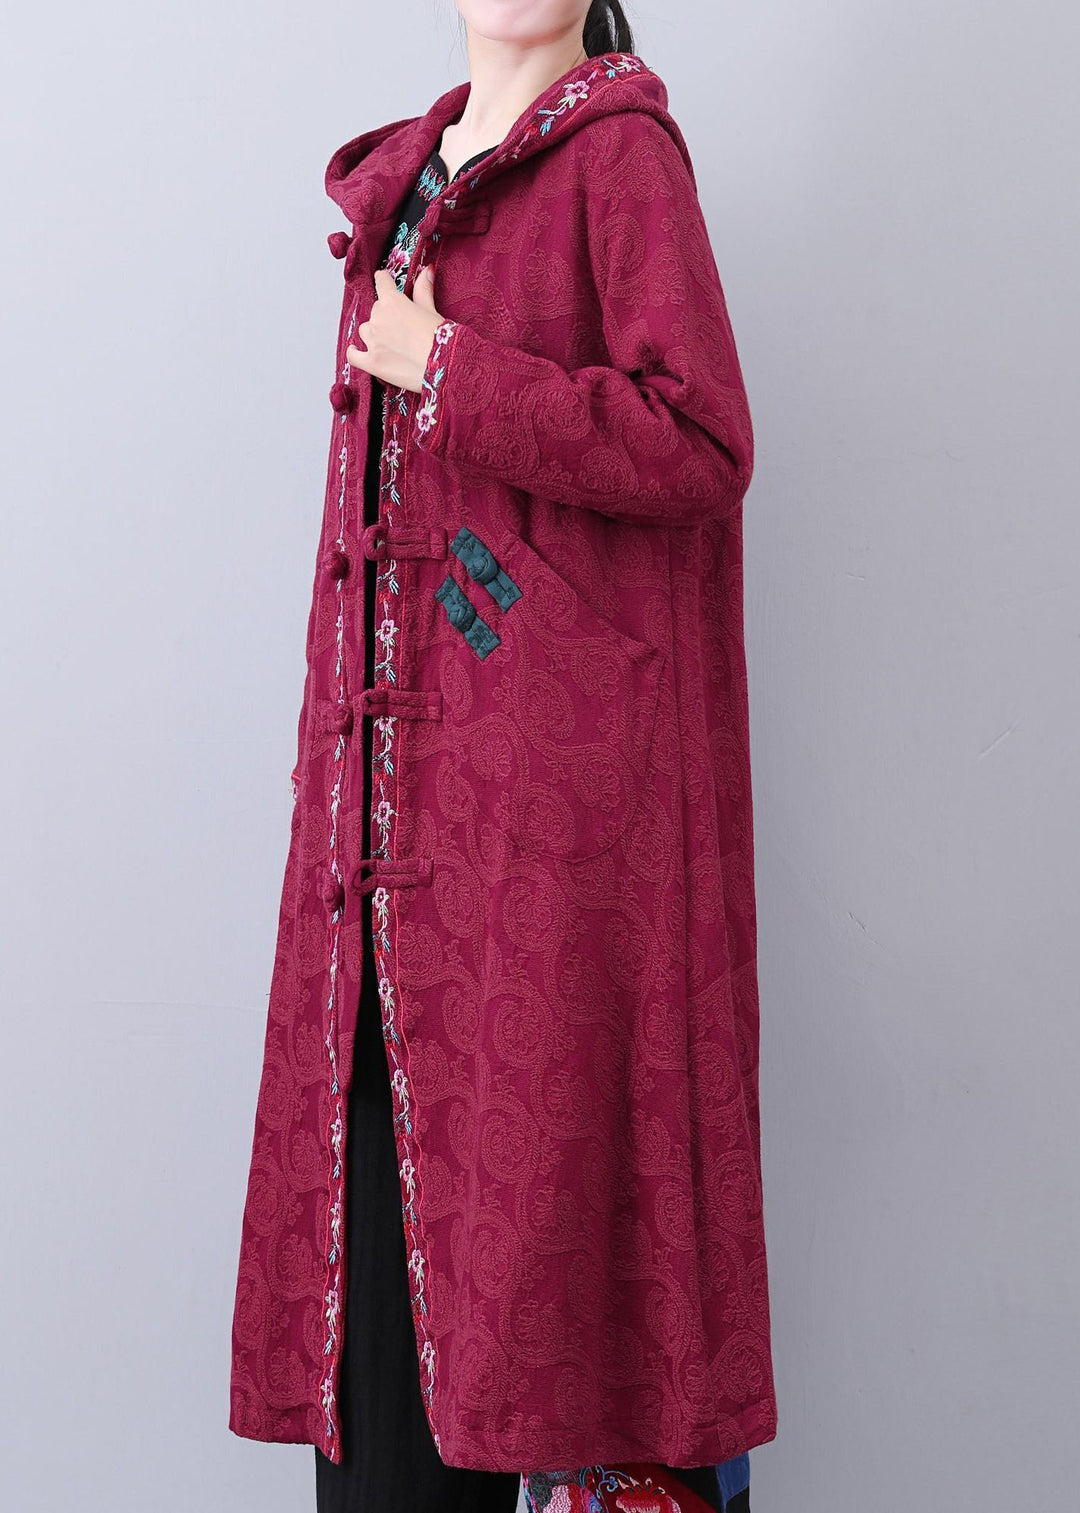 Art Brick Red Hooded Embroidered Jacquard Long Coat Fall